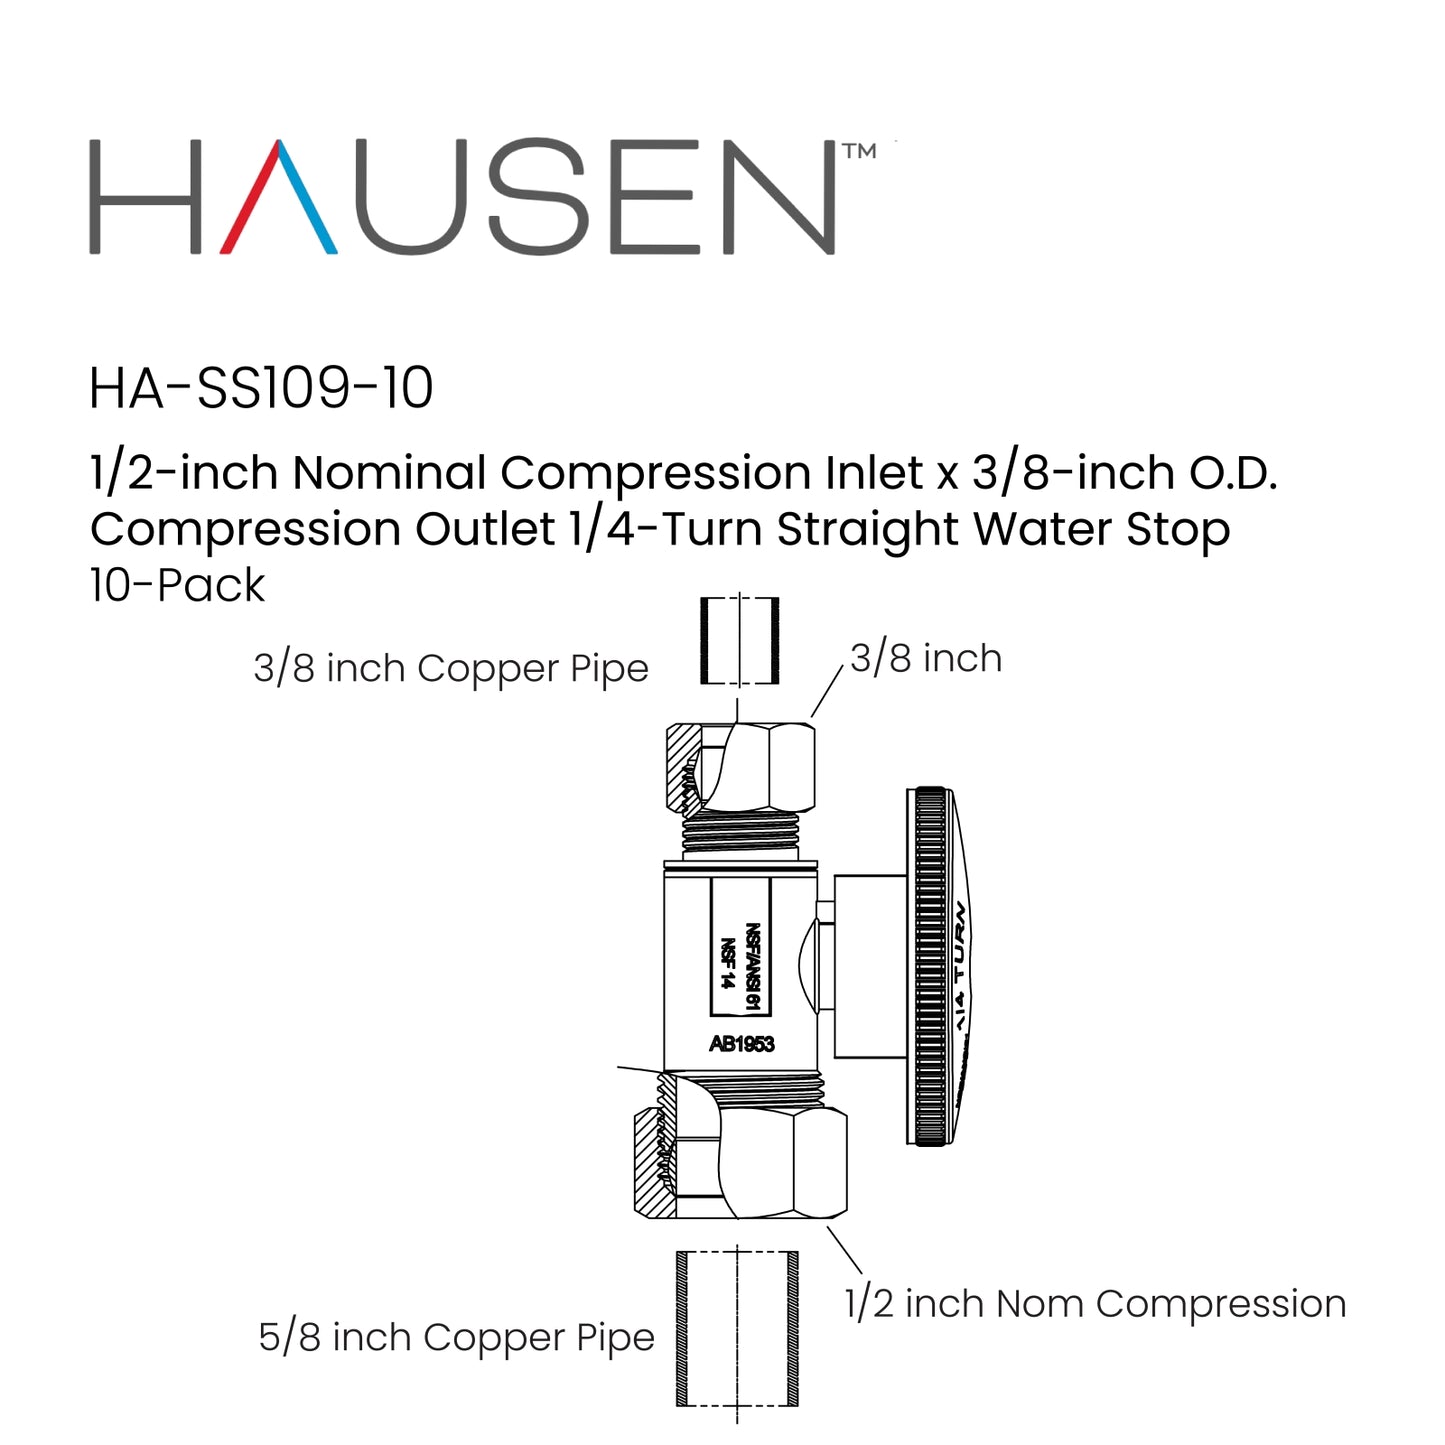 Hausen 1/2-inch Nominal Compression Inlet x 3/8-inch O.D. Compression Outlet 1/4-Turn Straight Water Stop; Lead-Free Forged Brass; Chrome-Plated; Compatible with Copper Piping, 10-Pack